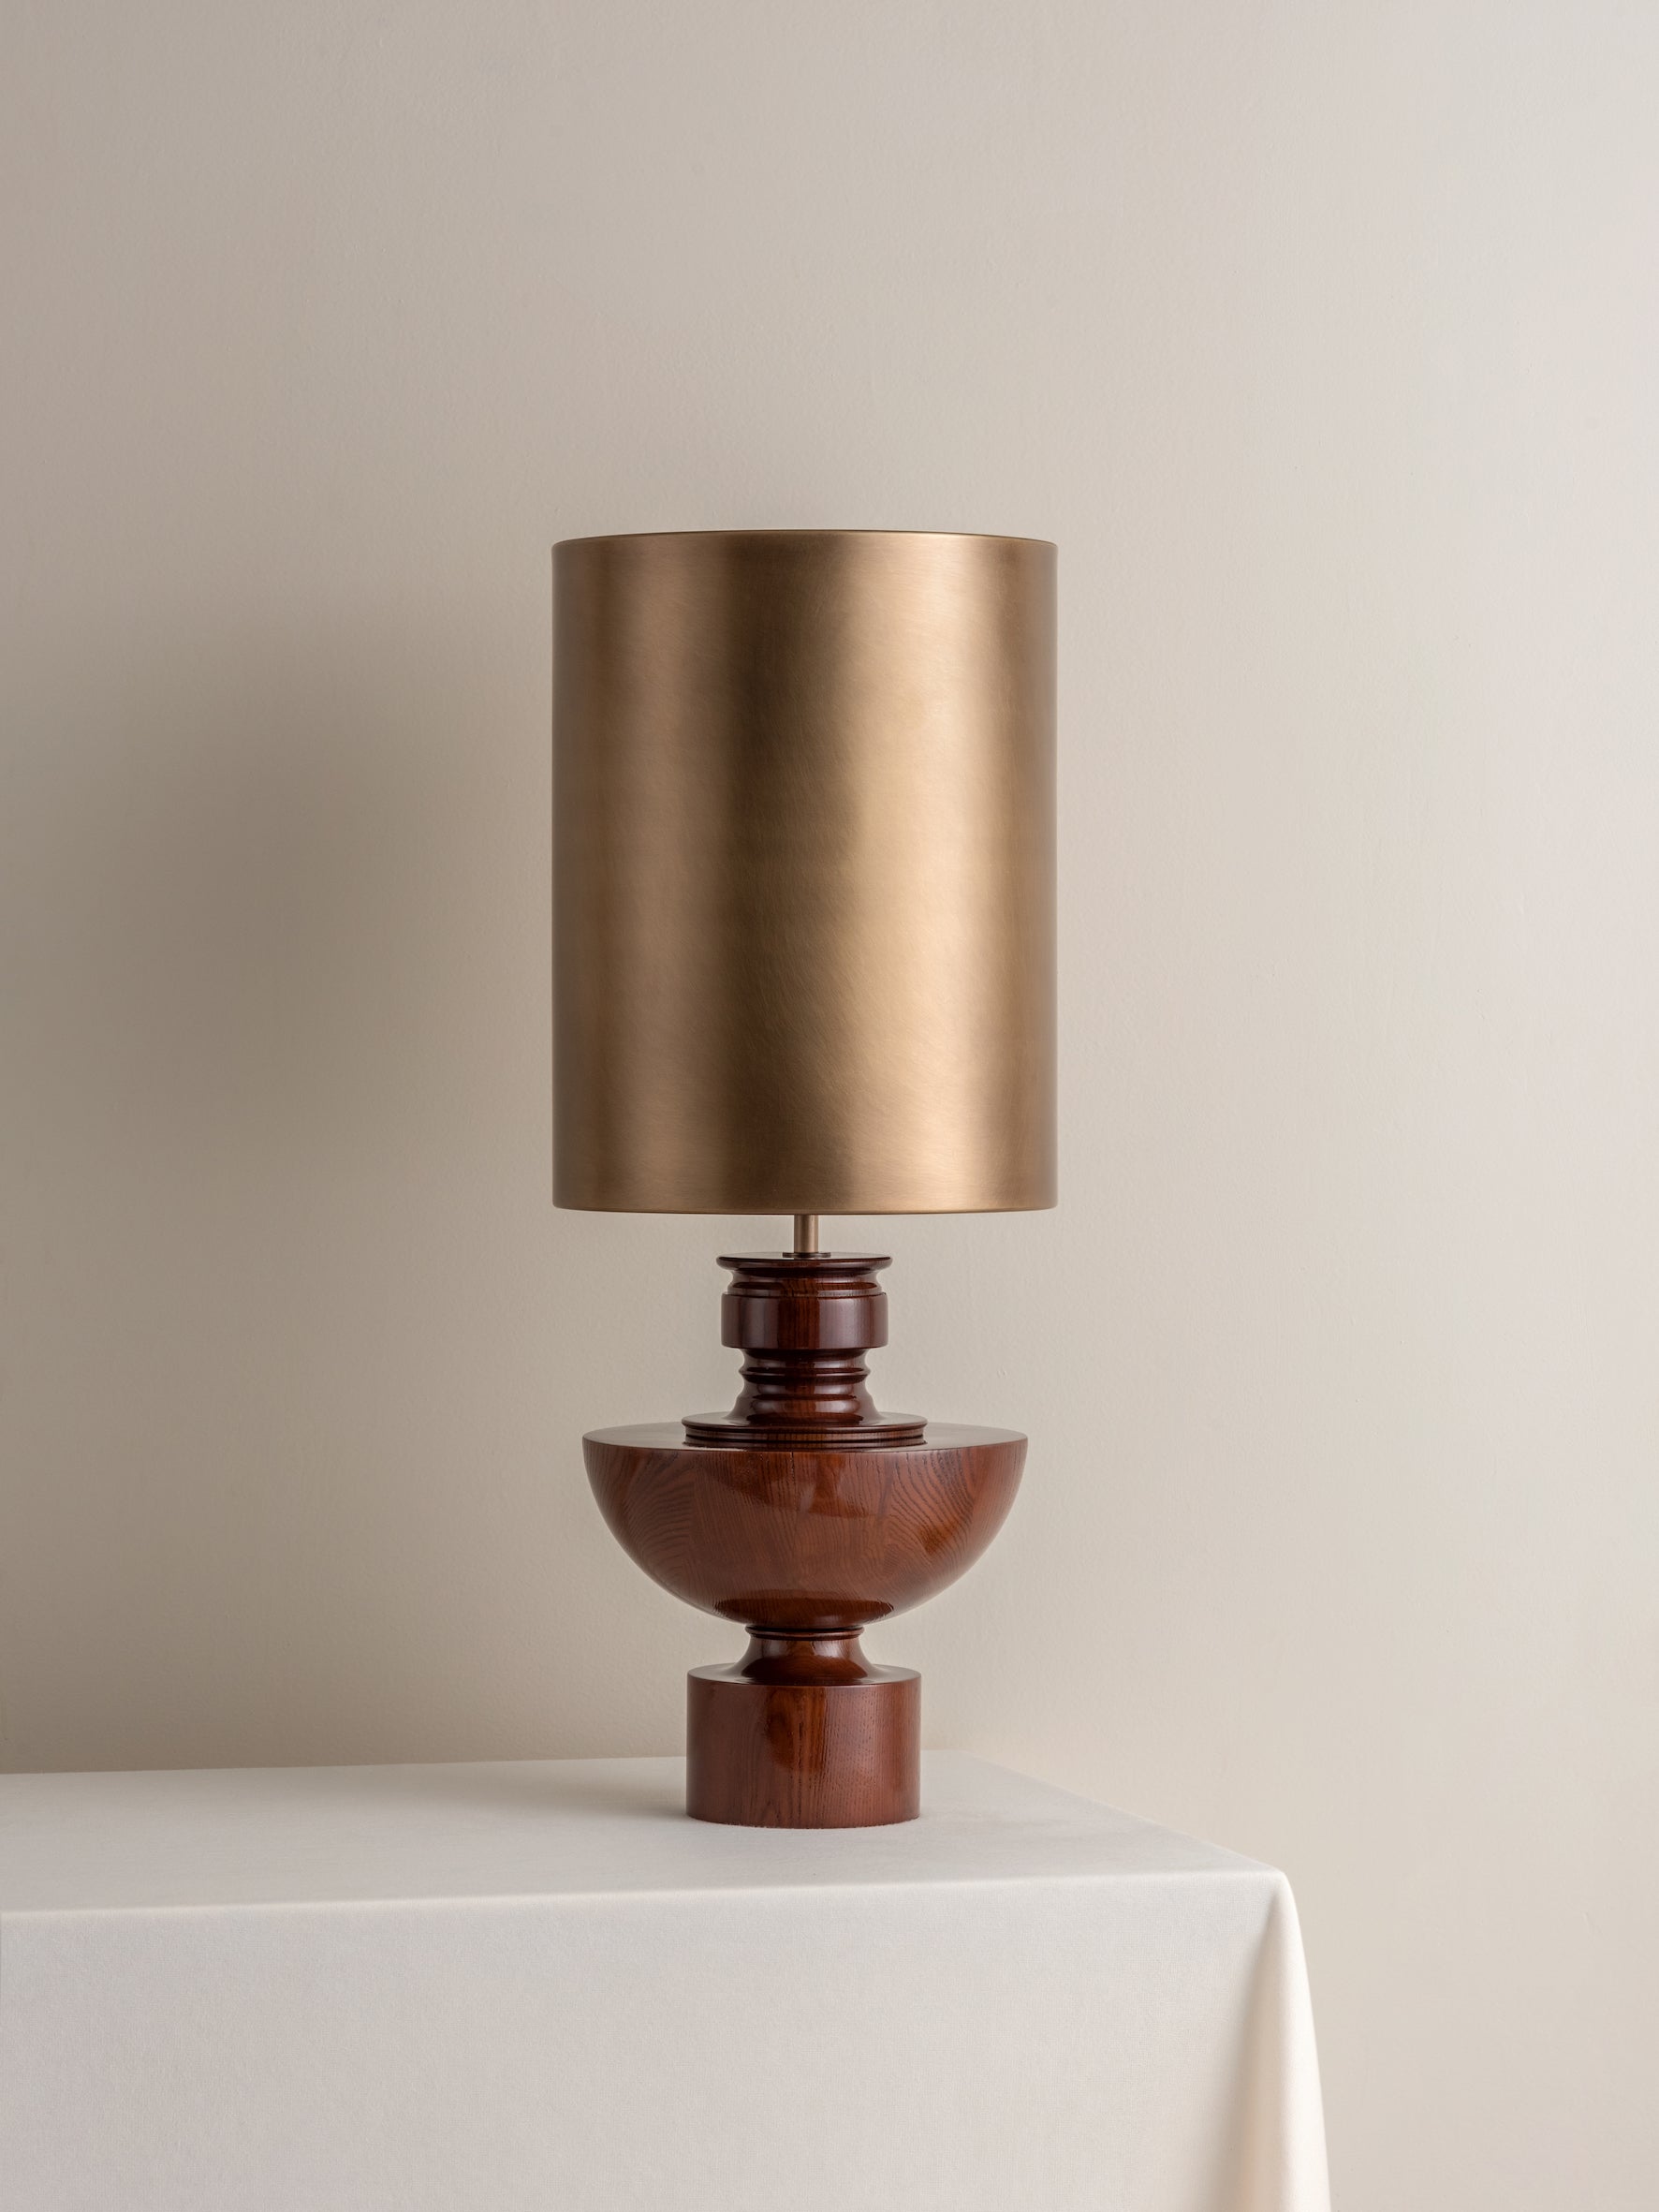 Editions spun wood lamp with + aged brass shade | Table Lamp | Lights & Lamps Inc | Modern Affordable Designer Lighting | USA